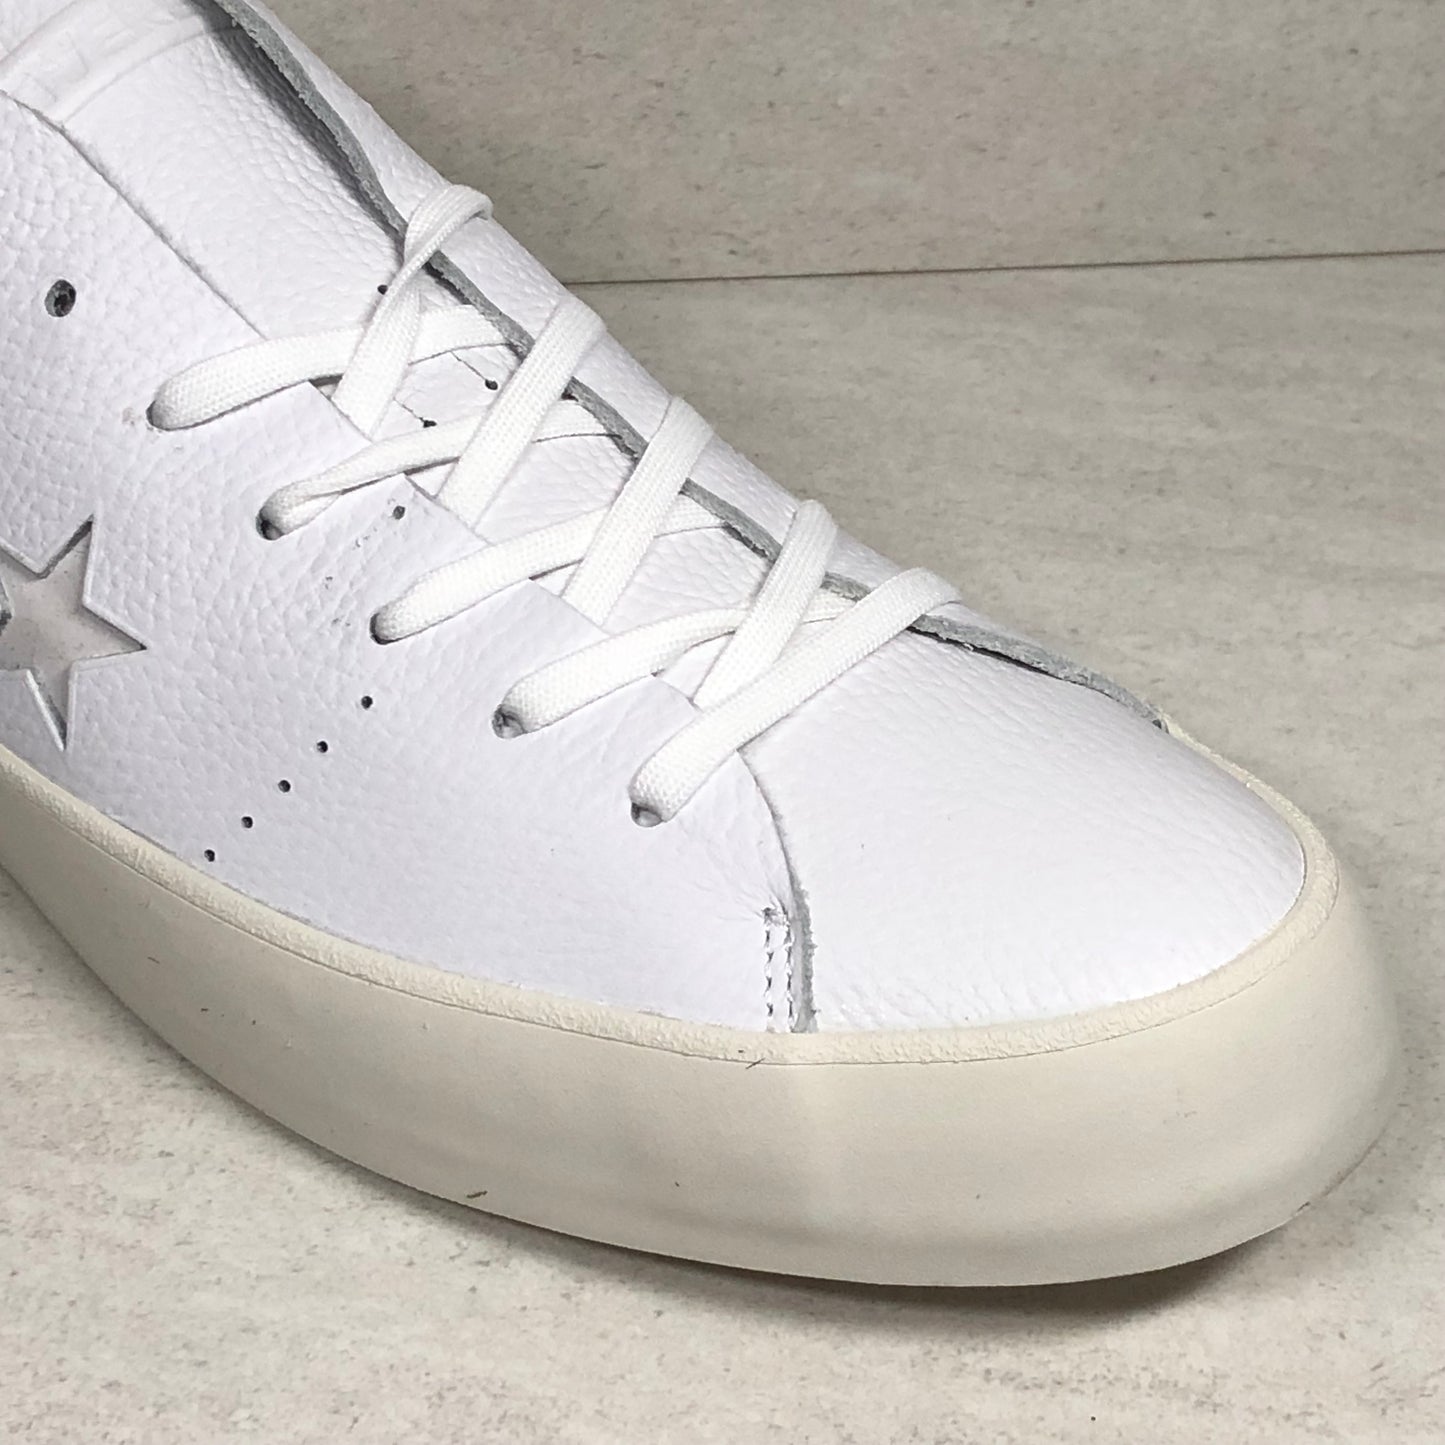 DS Converse One Star Prime Low Top Taille 10.5/Taille 11.5/Taille 12 Blanc 154839C